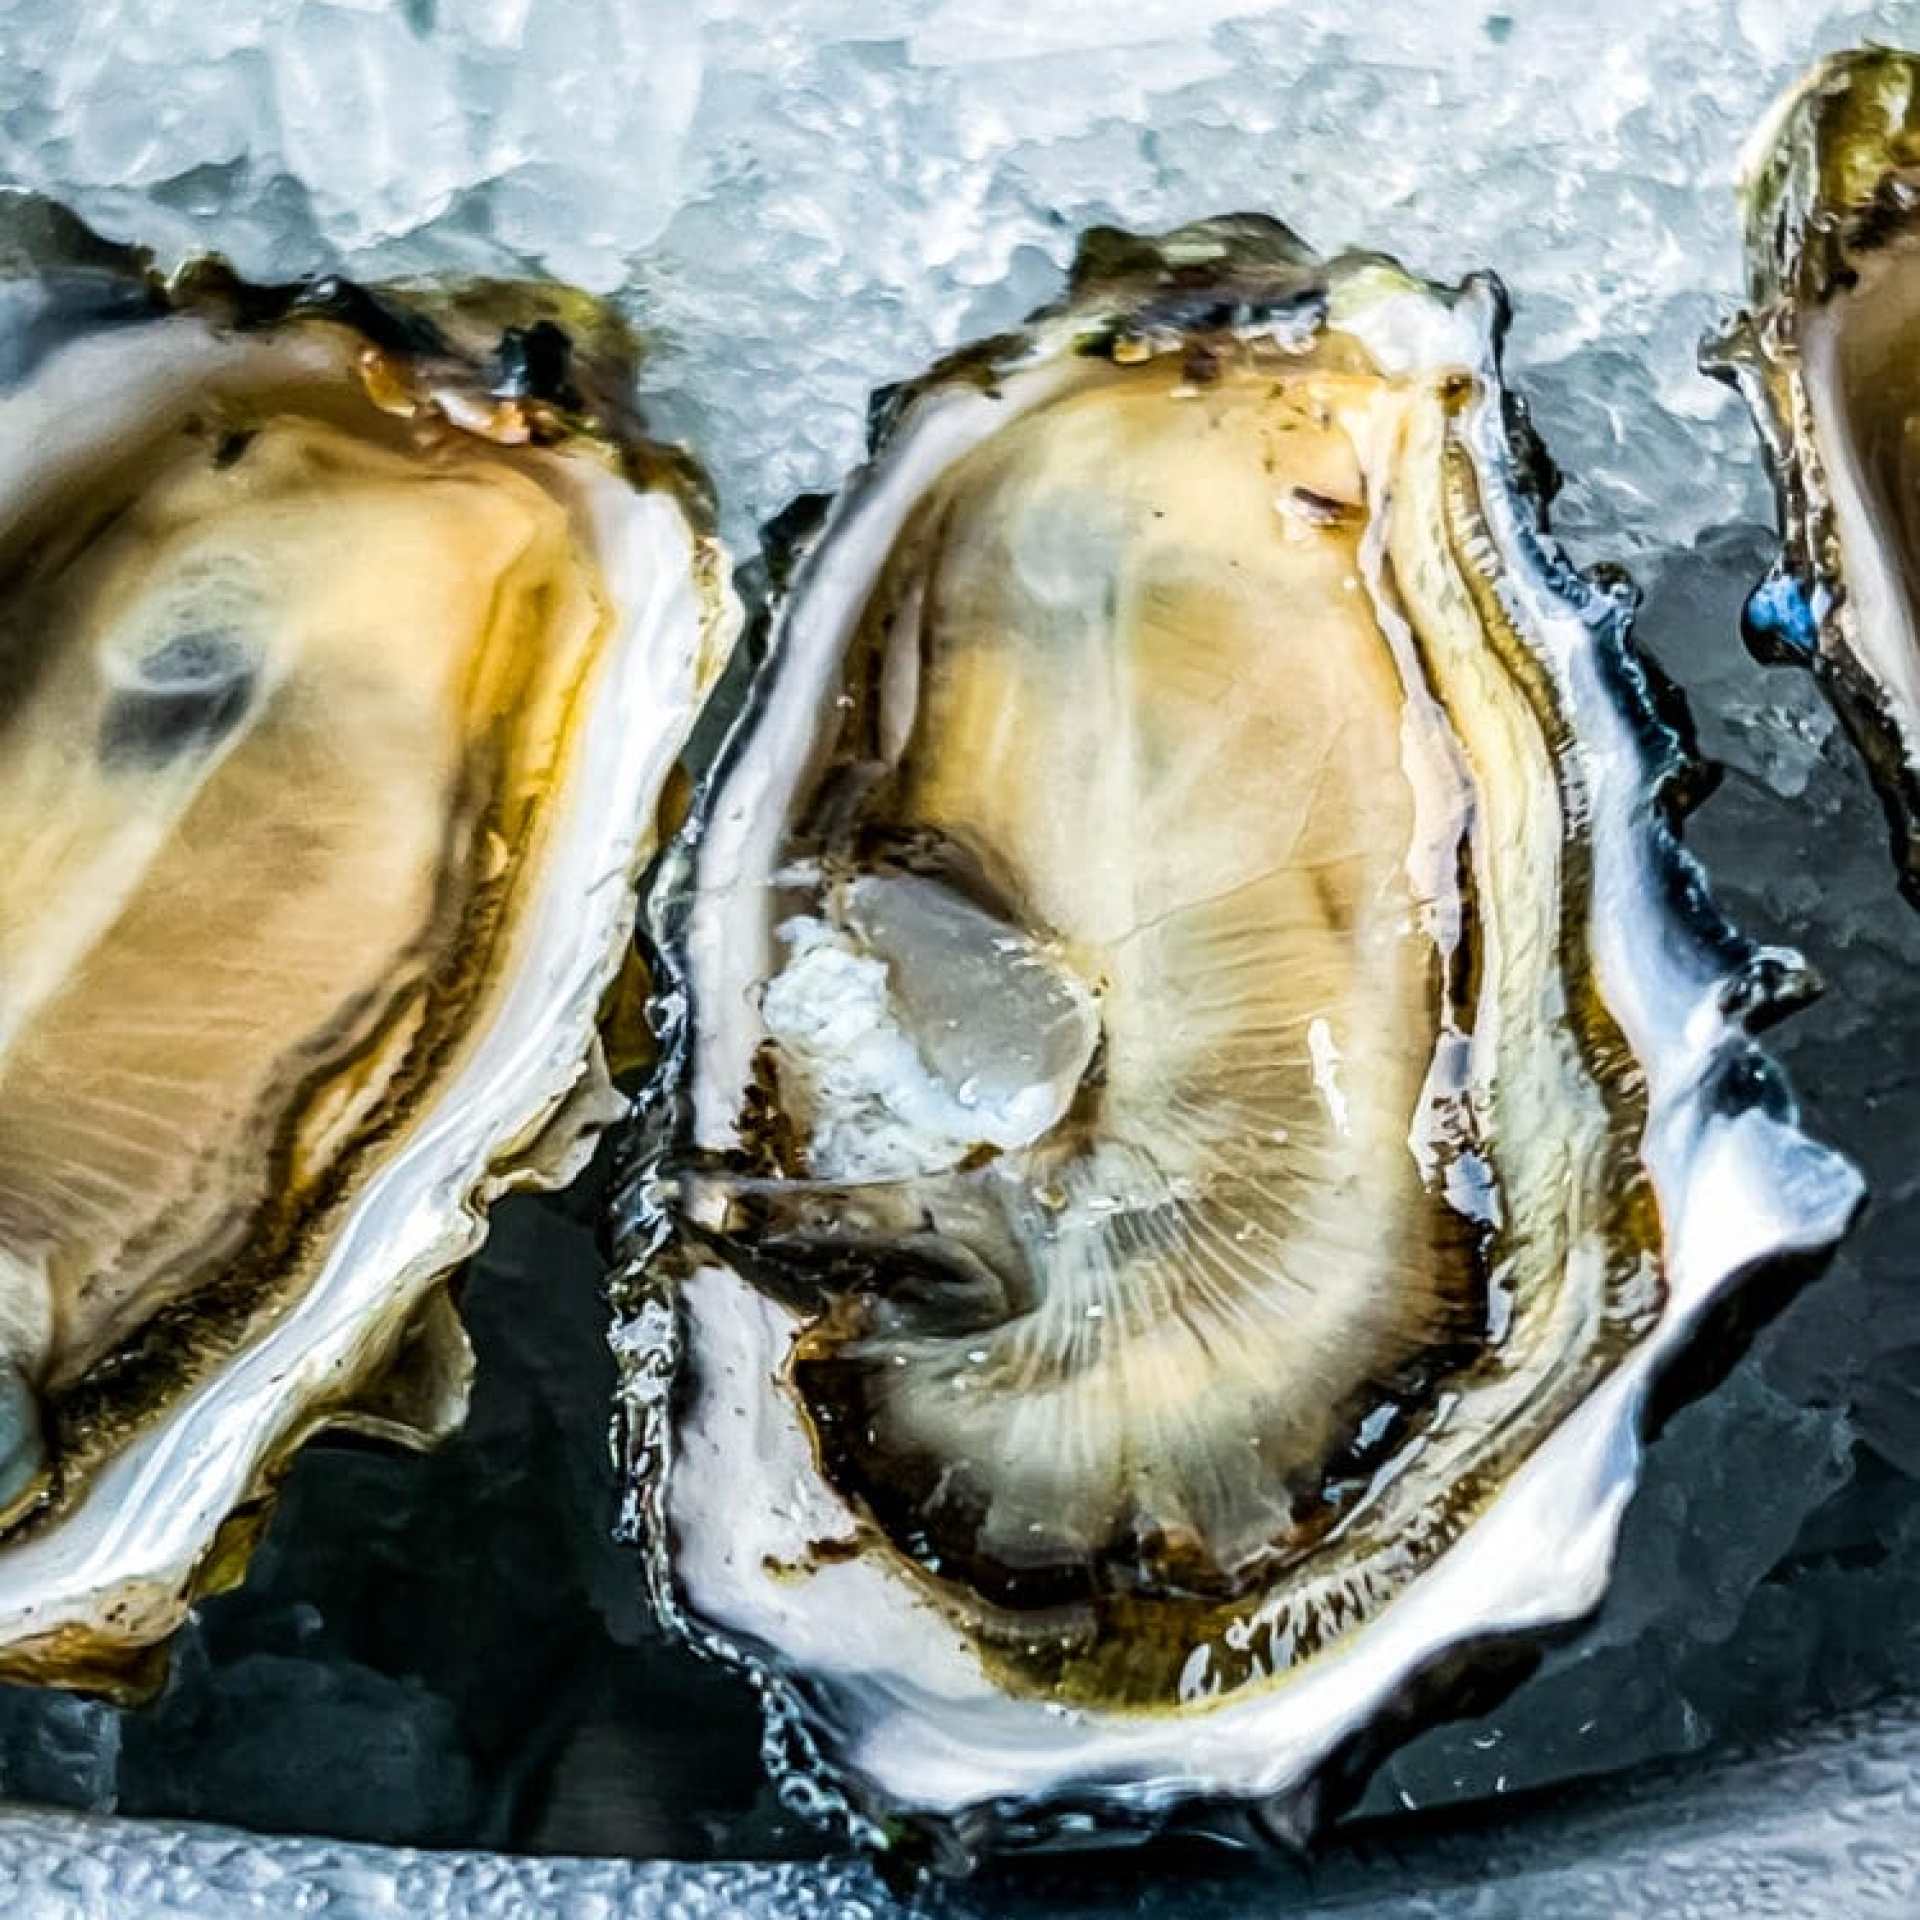 picture of marshall store oysters on a metal plate with ice